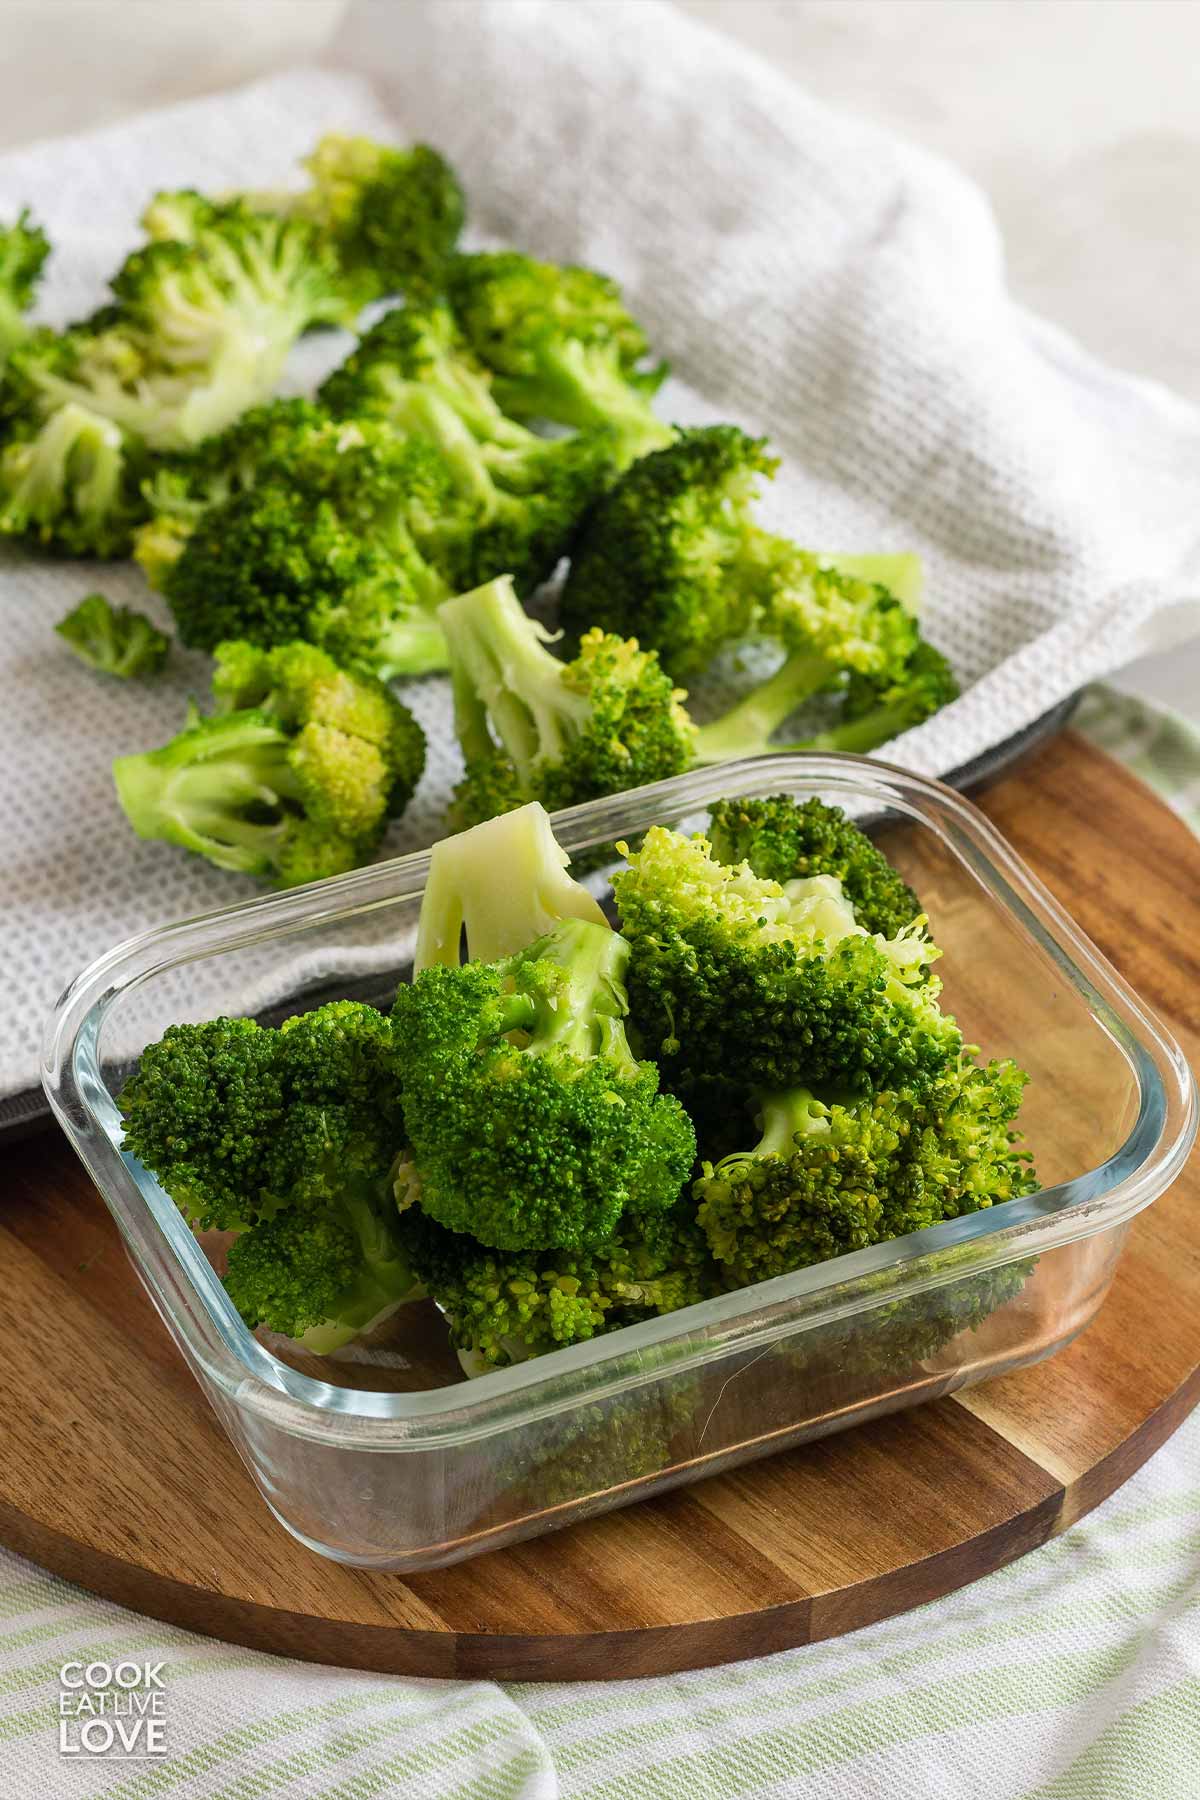 Blanched broccoli in a small container with a tray behind the container.